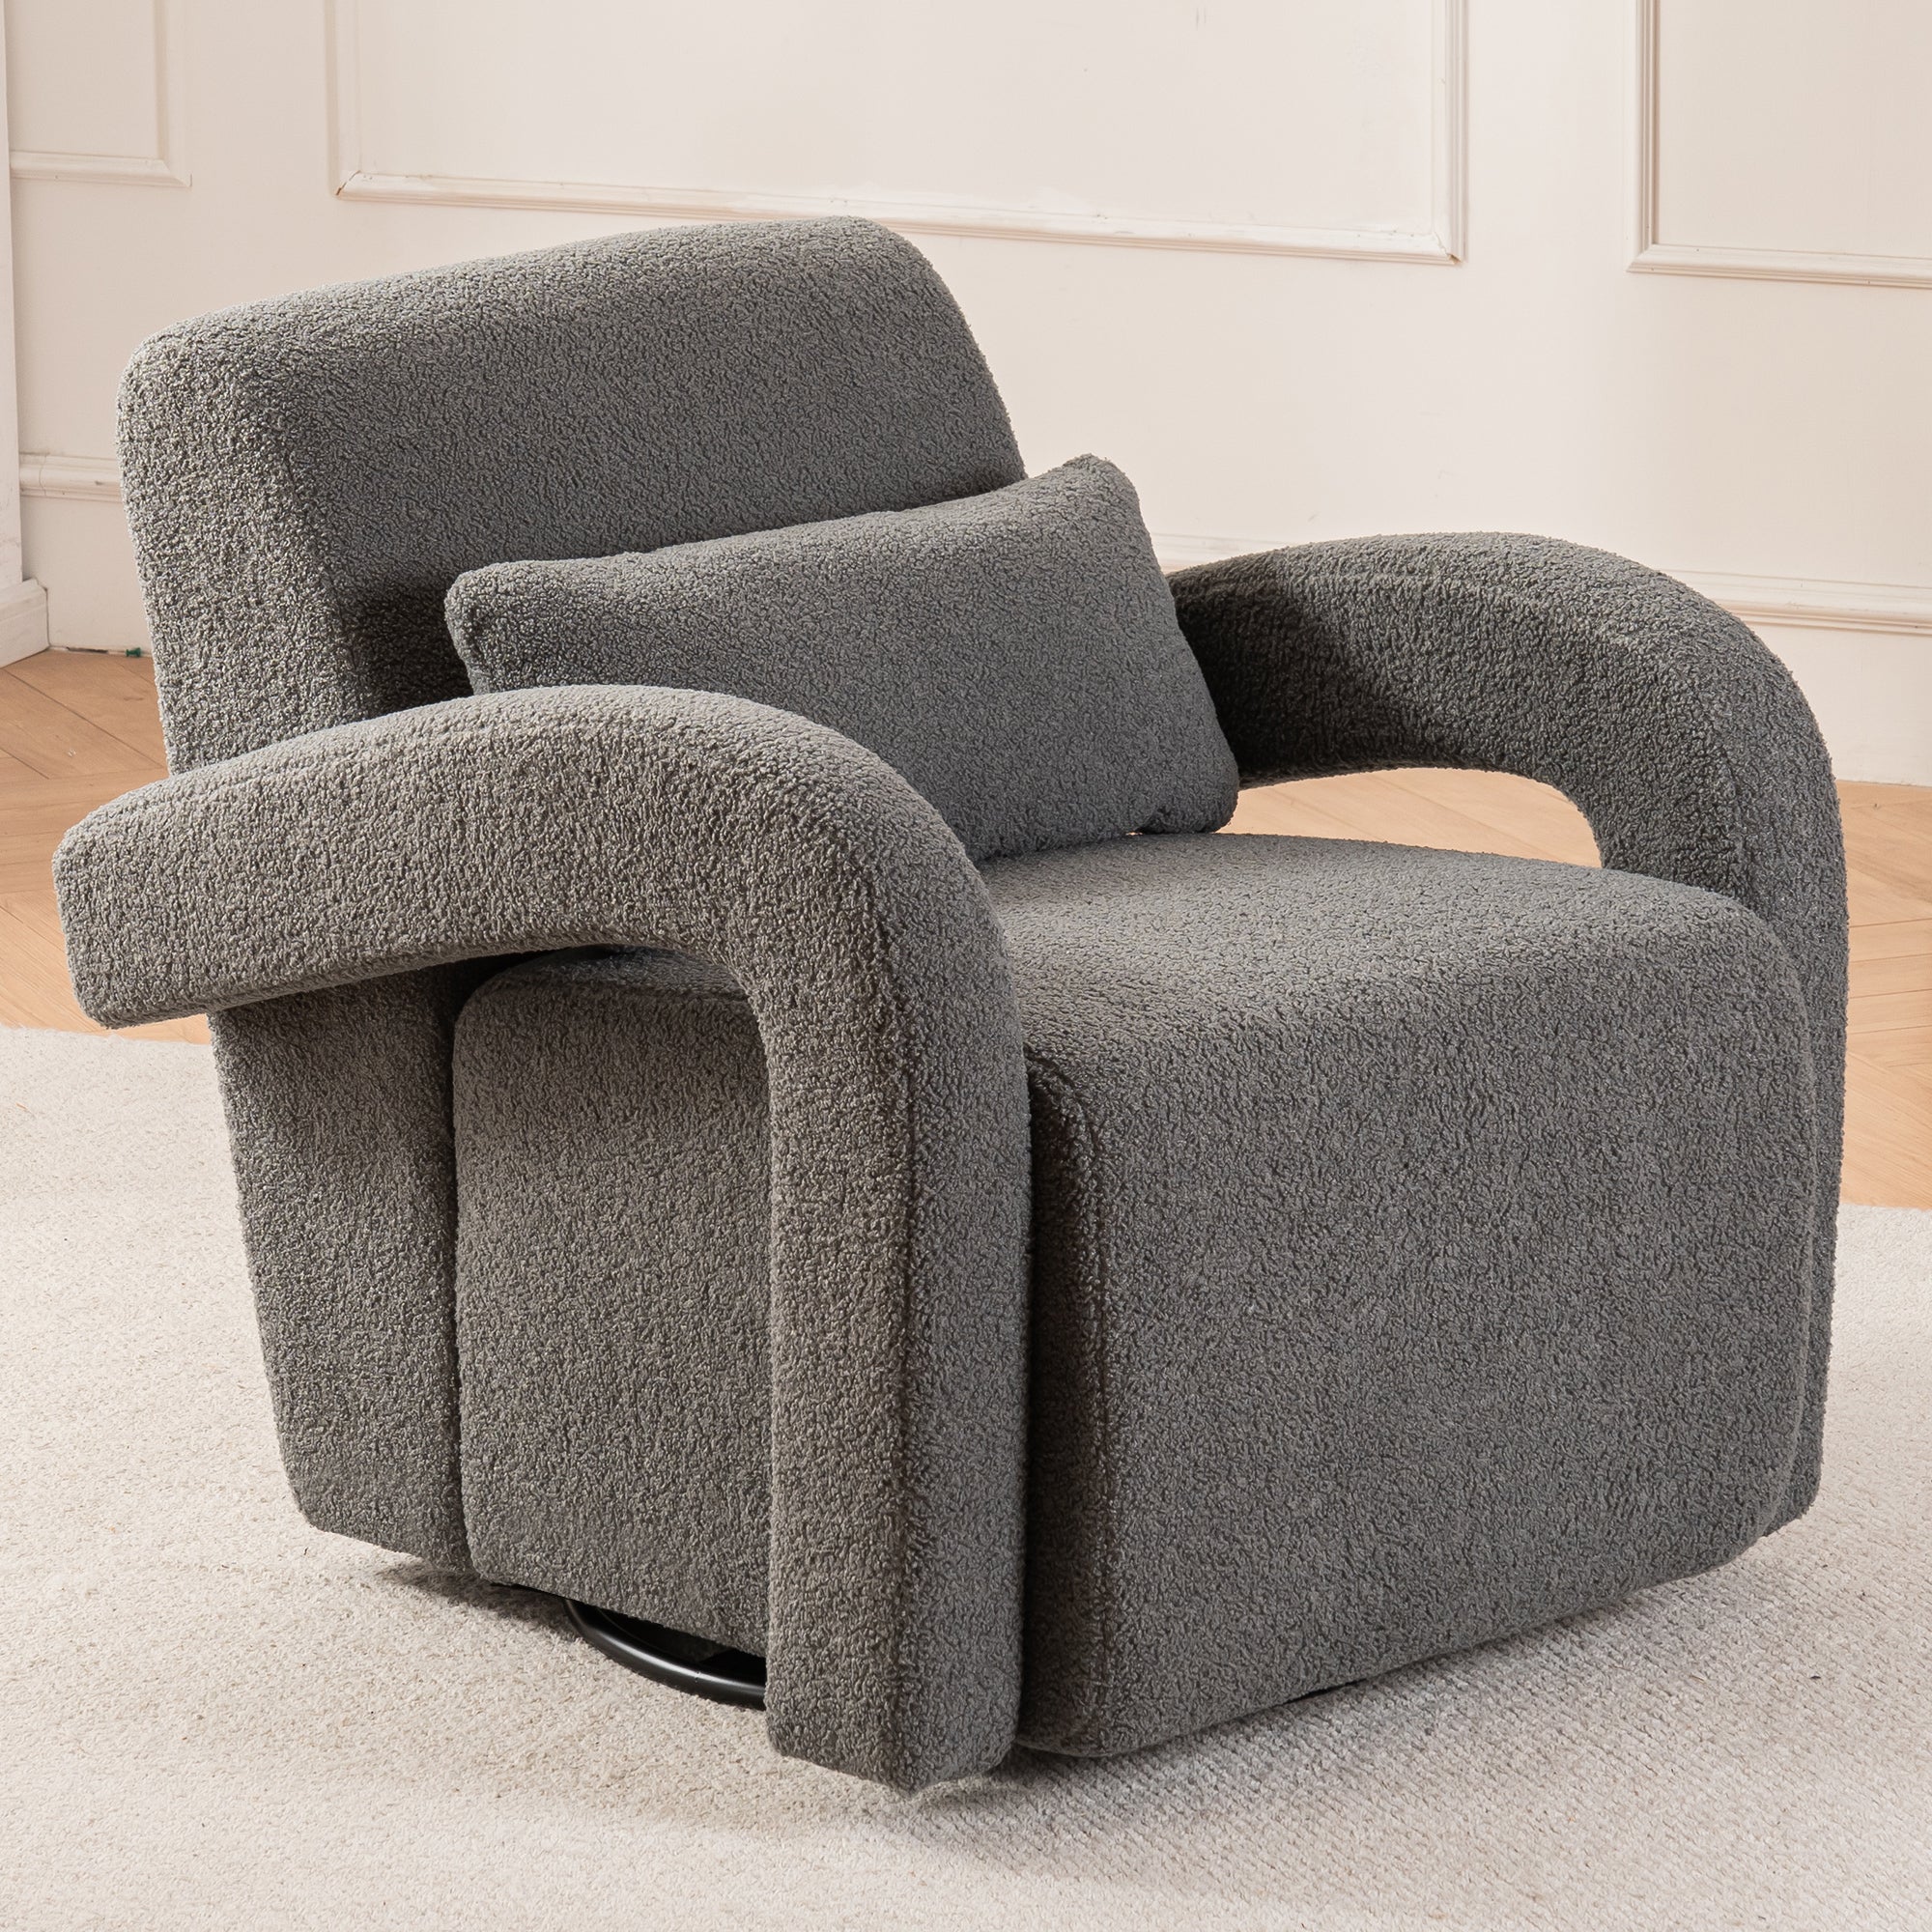 🆓🚛 Cozy Teddy Fabric Armchair - Modern Sturdy Lounge Chair With Curved Arms and Thick Cushioning for Plush Comfort, Dark Gray